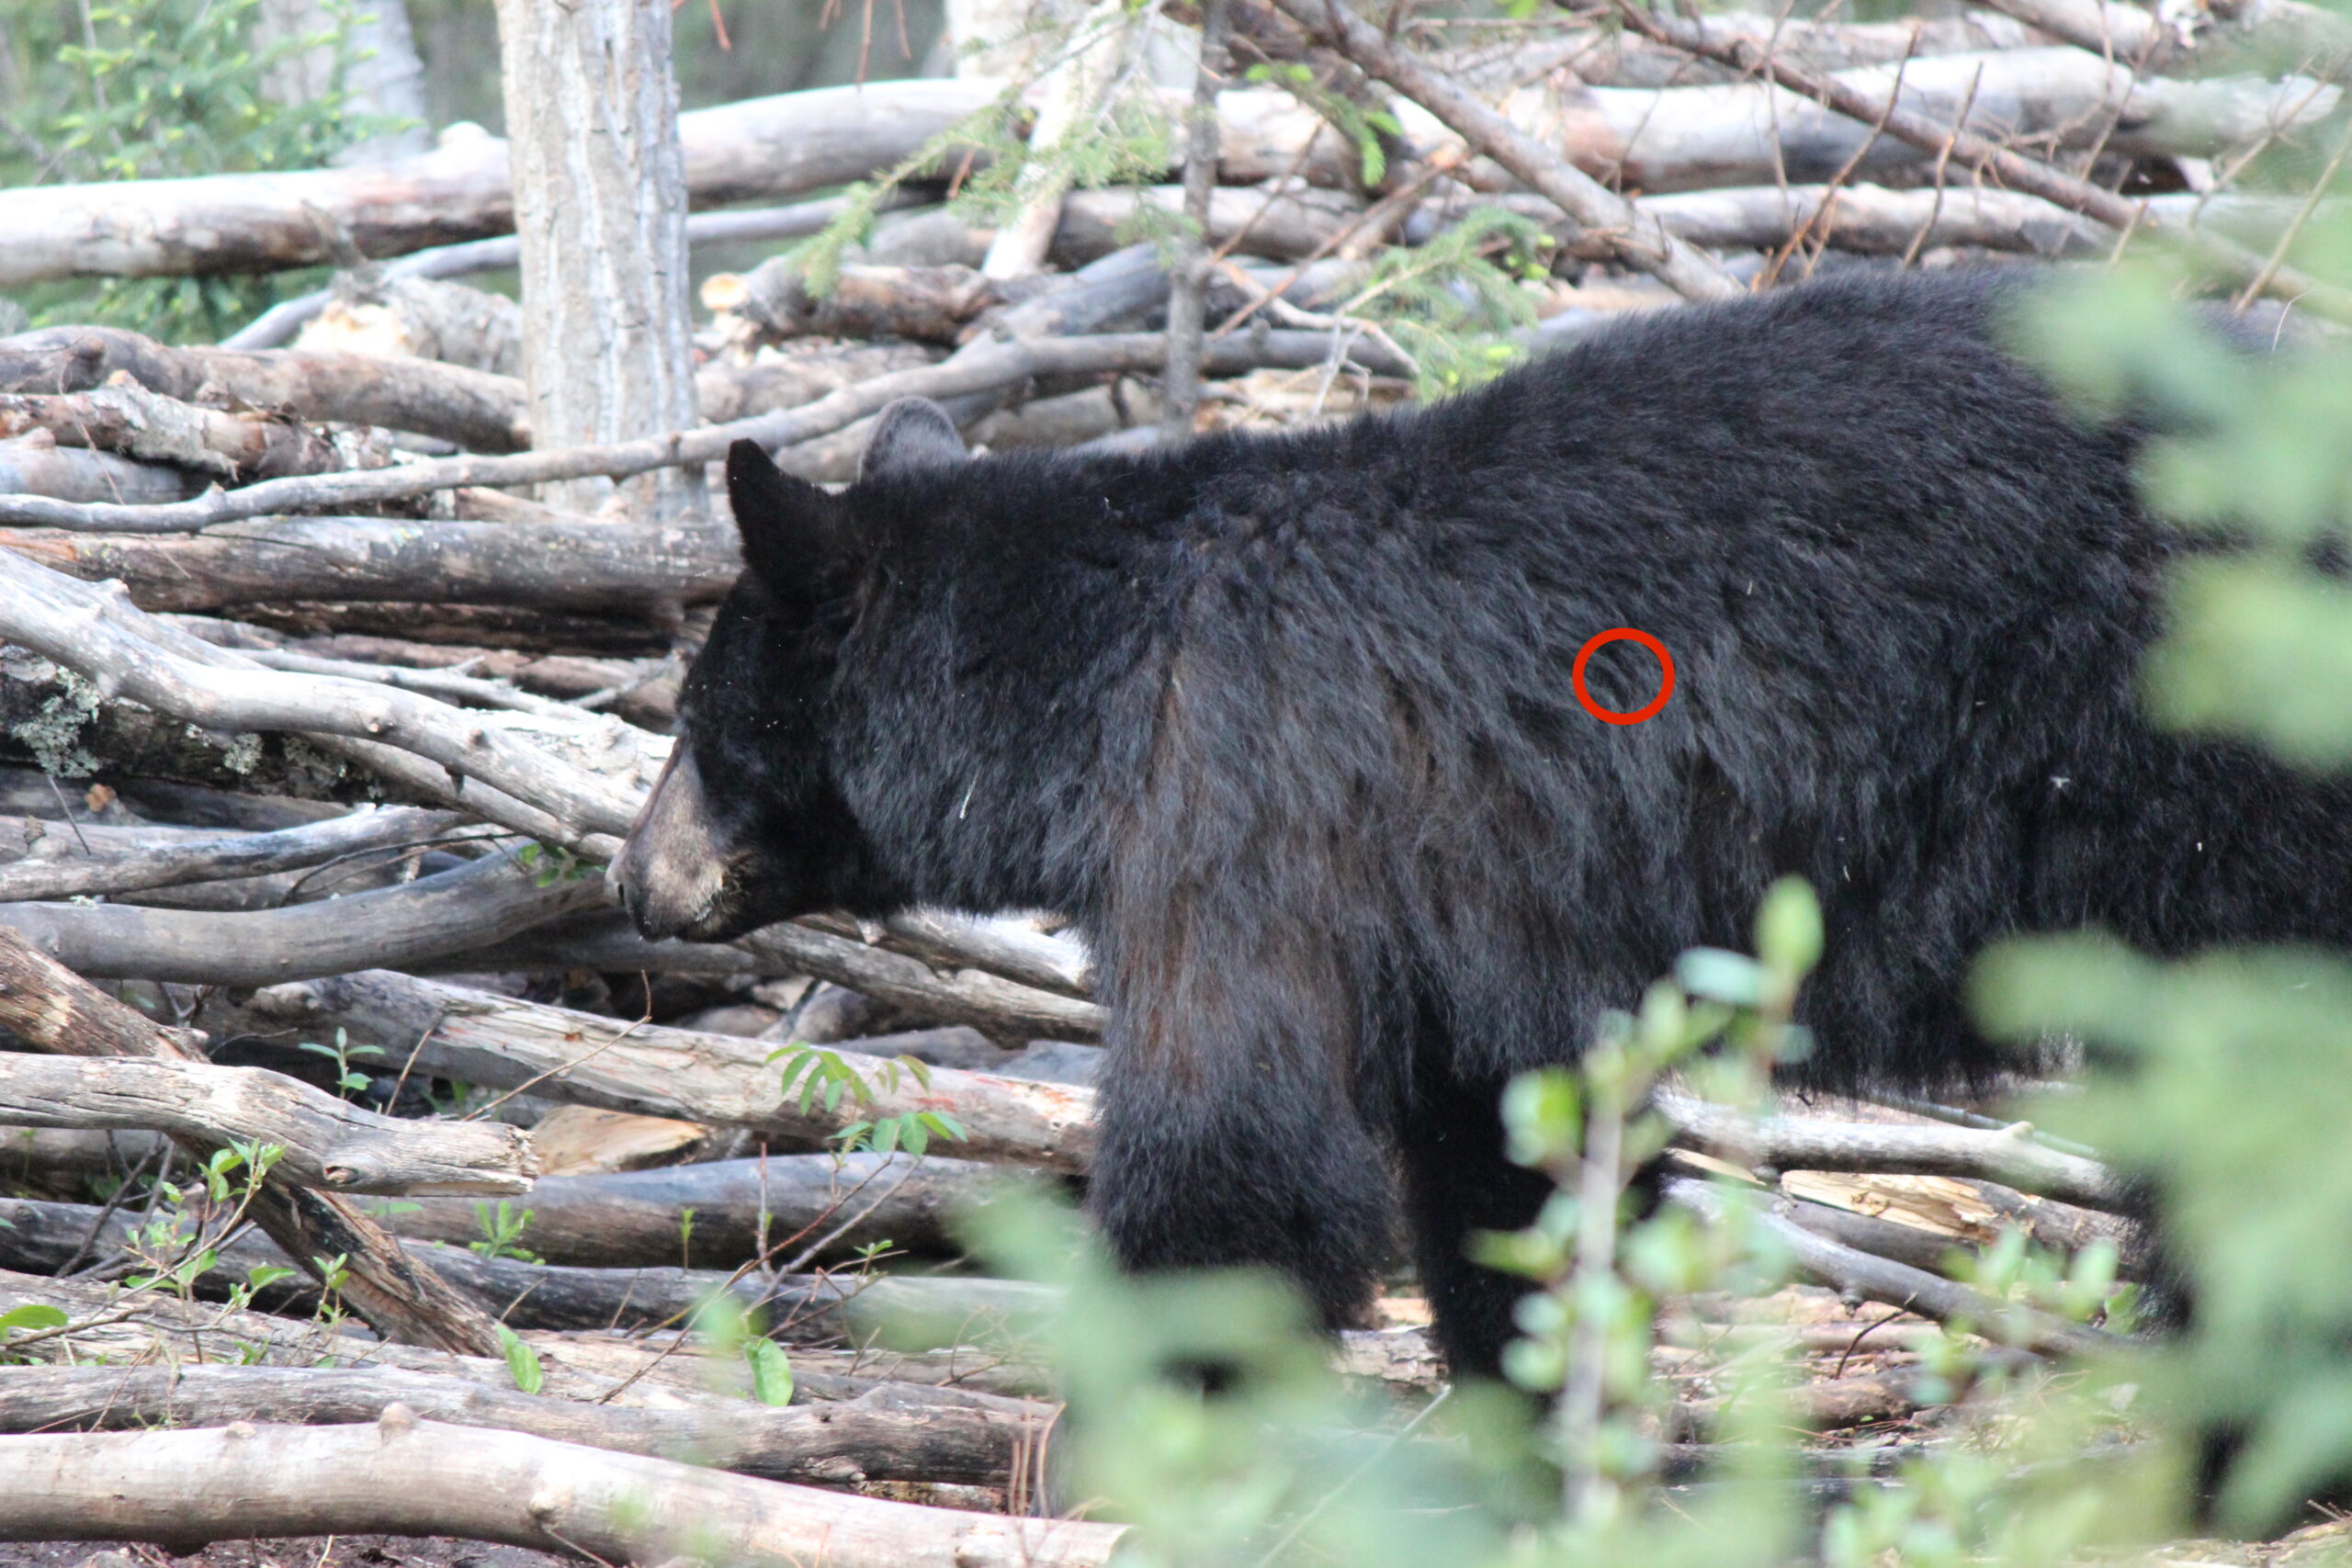 Where to shoot a bear when its front leg is forward.